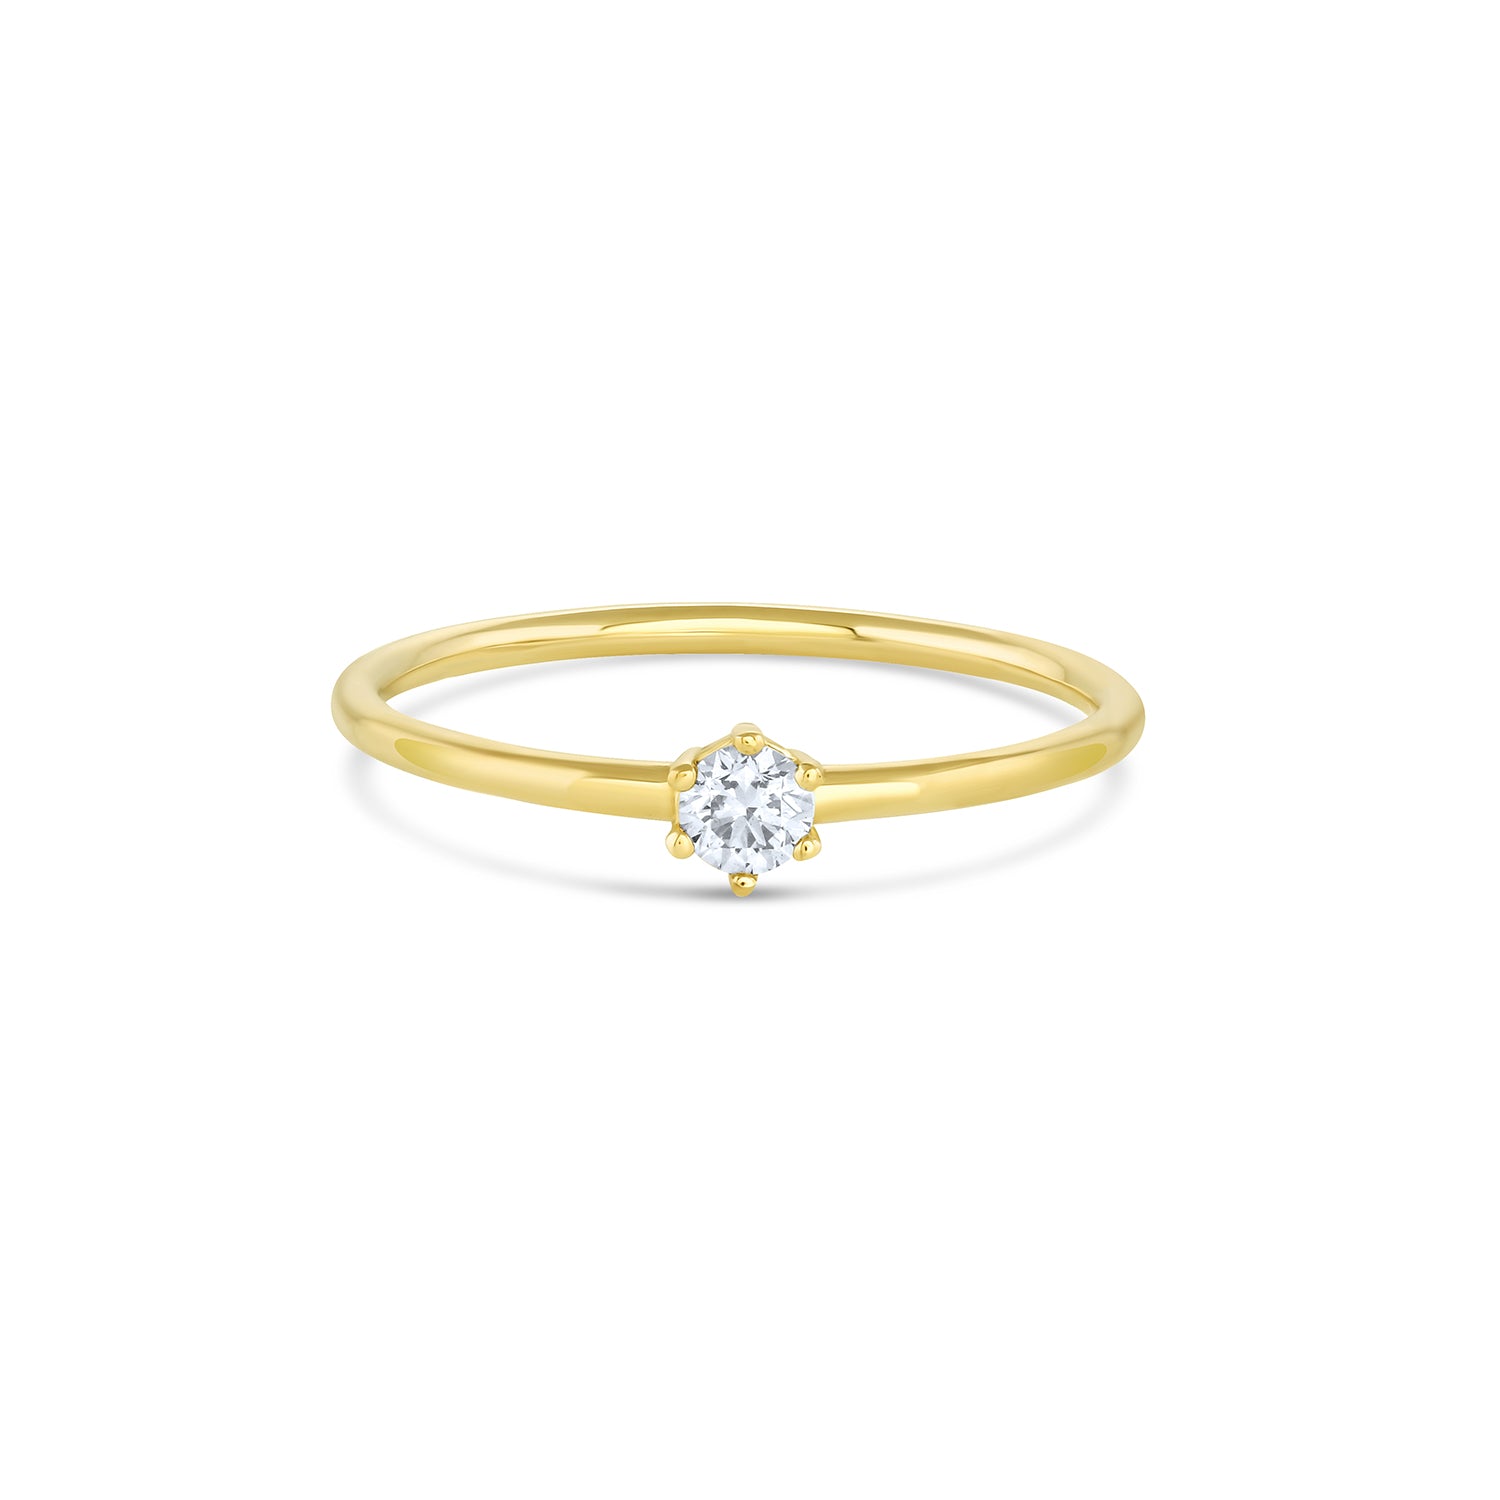 Solitaire ring with a 1.00 carat diamond in white gold - BAUNAT